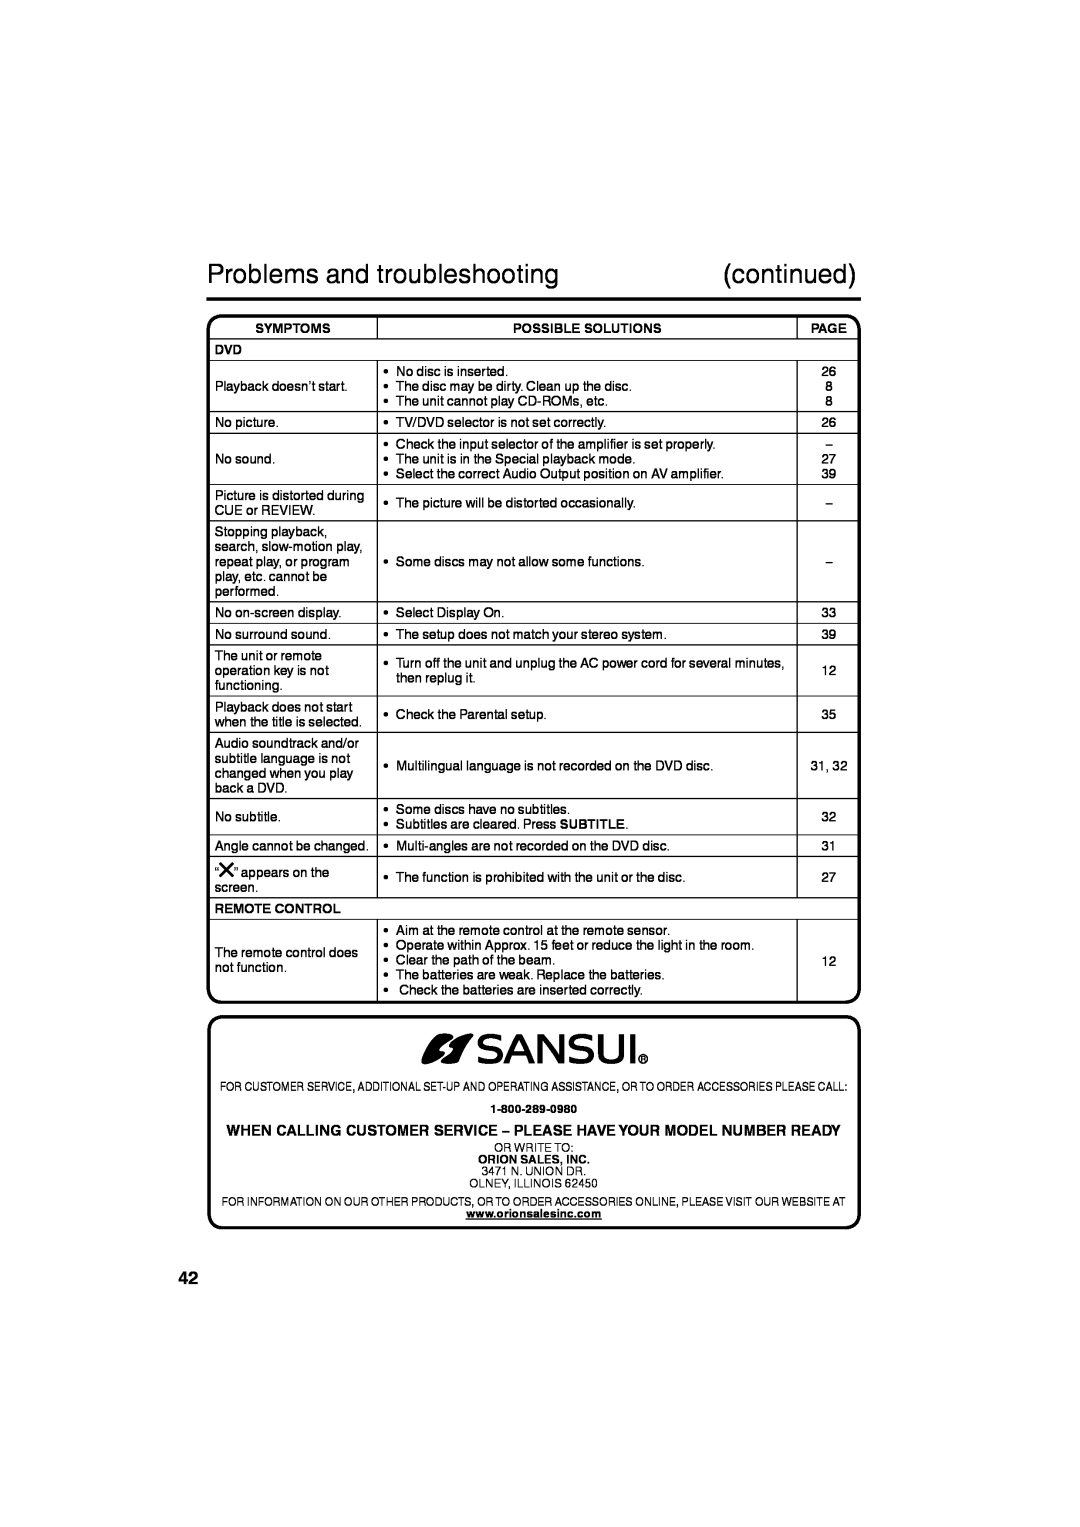 Sansui HDLCDVD265 Problems and troubleshooting, When Calling Customer Service - Please Have Your Model Number Ready, Page 